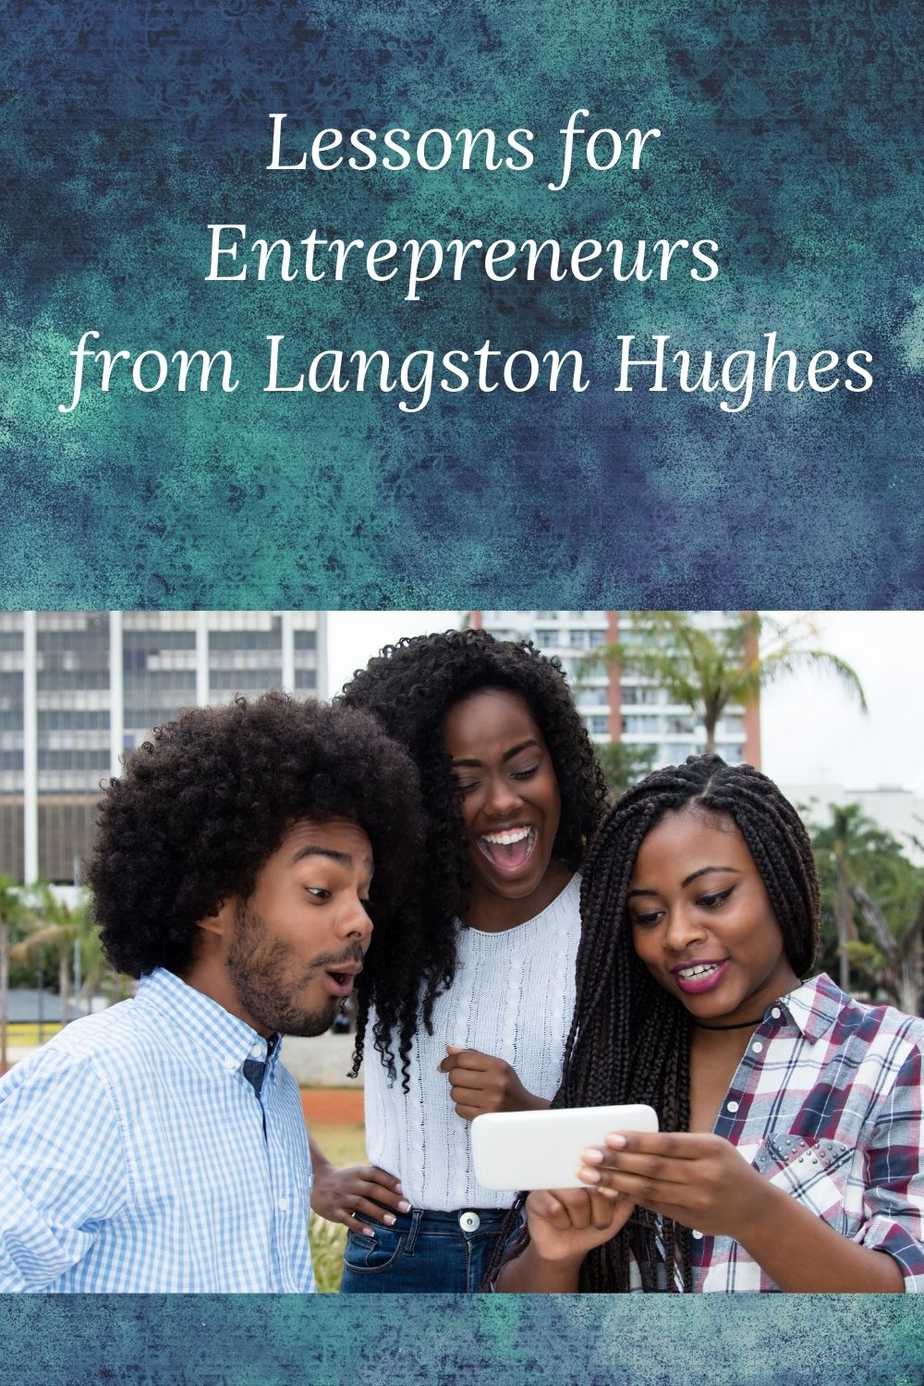 Picture of 3 African American People and the words " Lessons for Entrepreneurs from Langston Hughes"